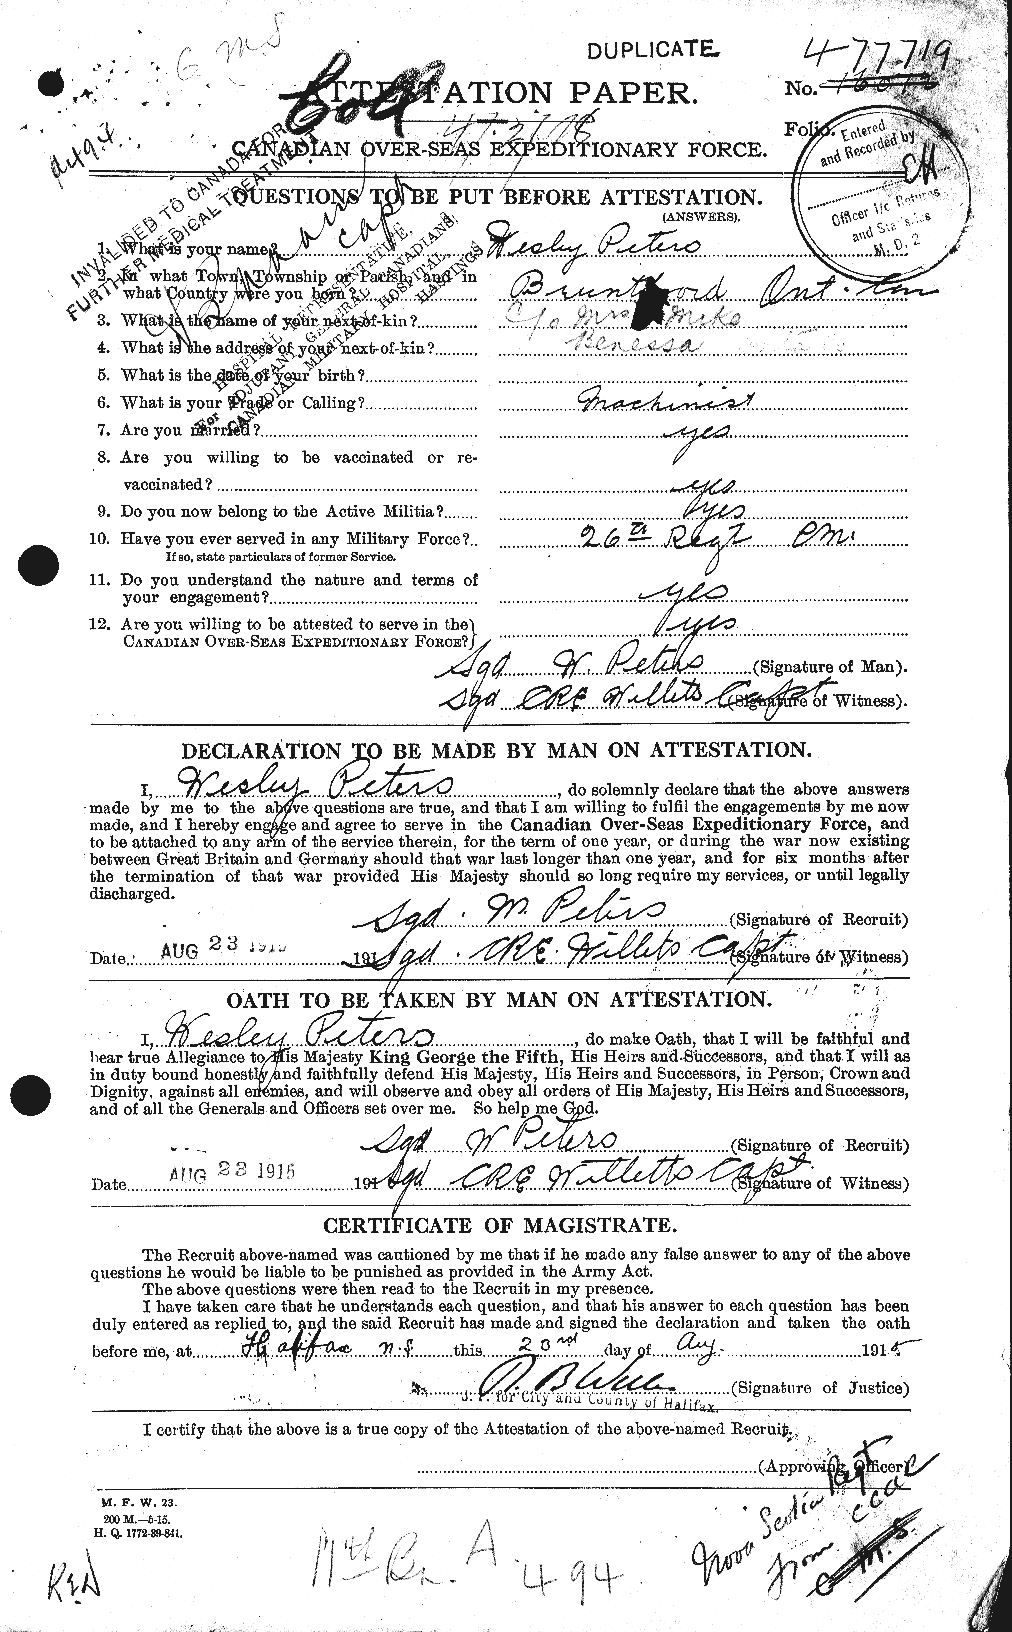 Personnel Records of the First World War - CEF 575638a